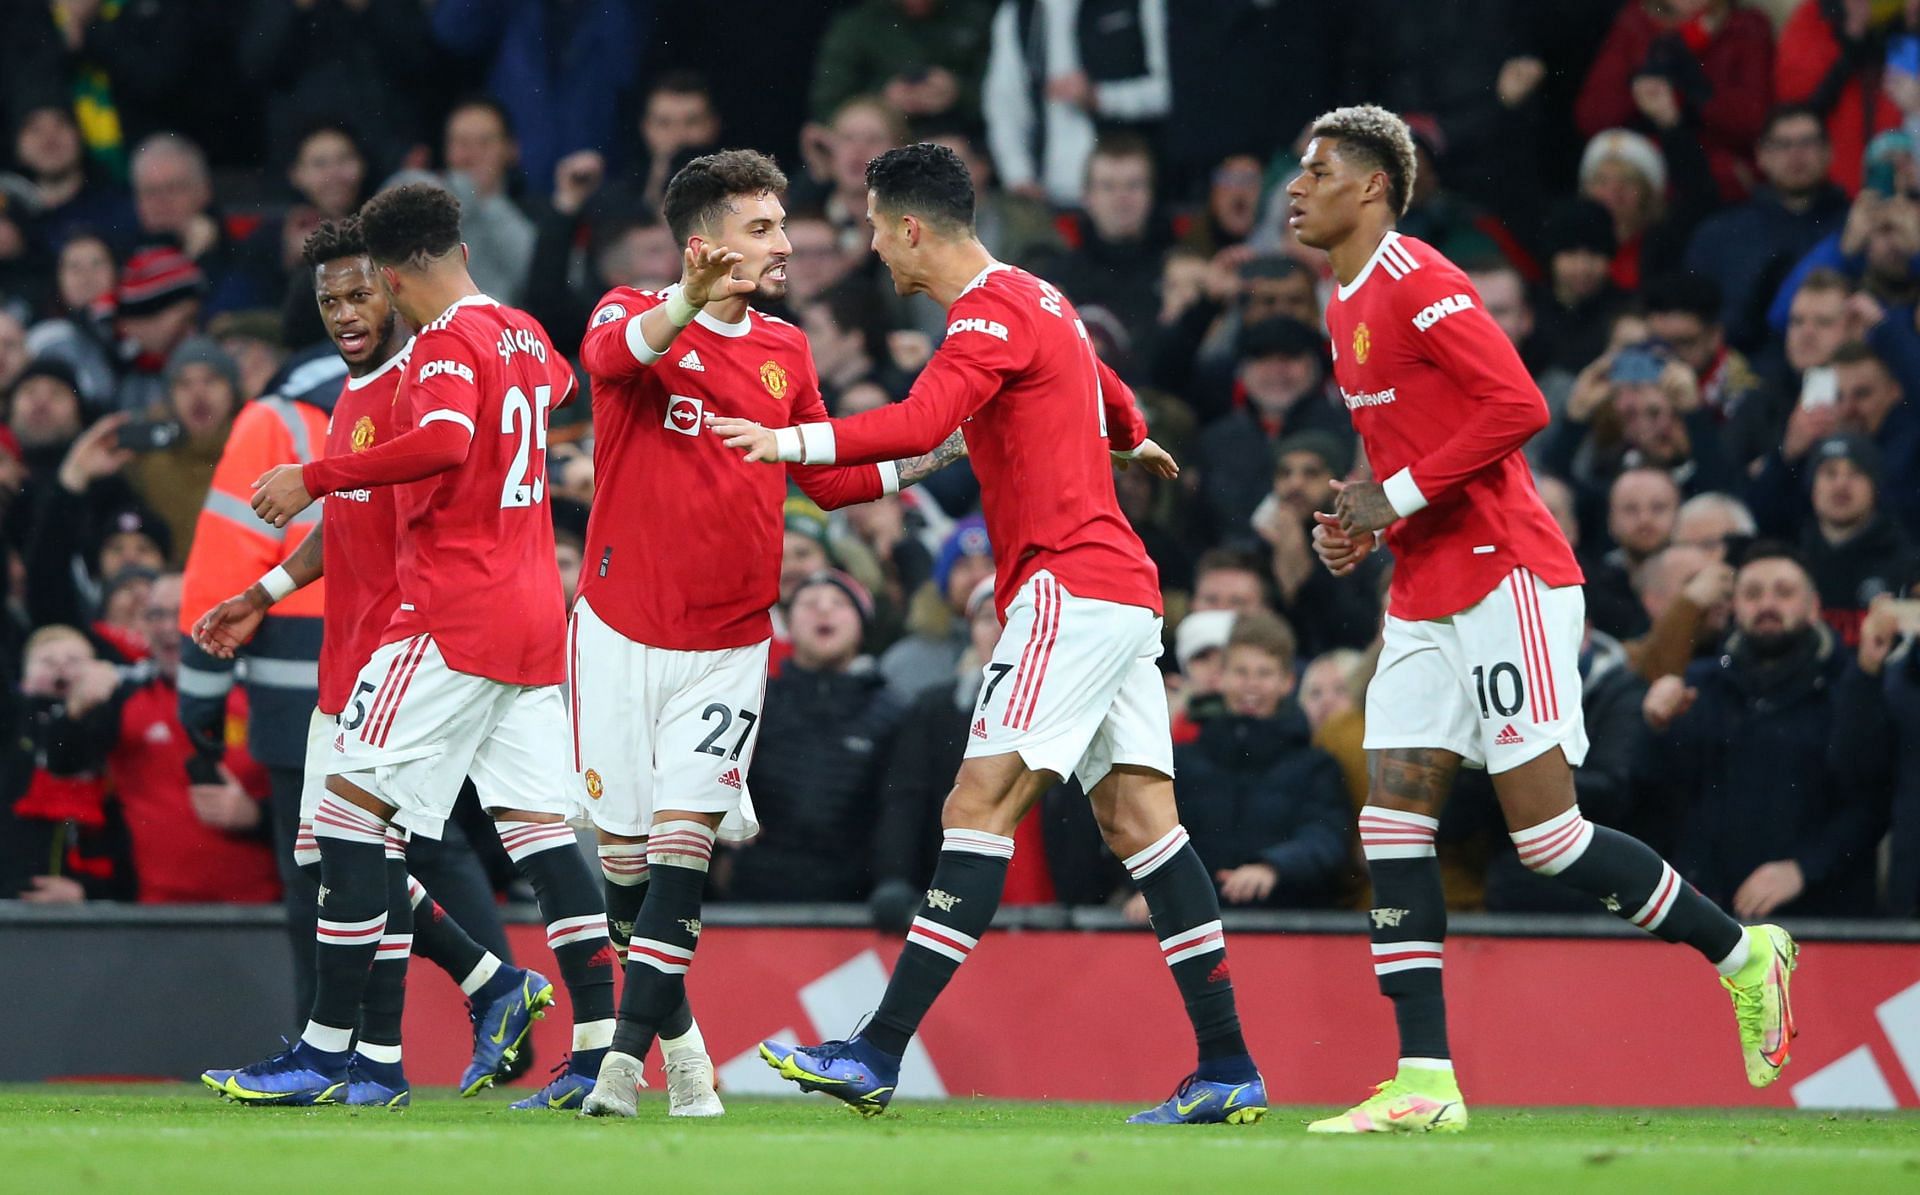 Manchester United players celebrate during their game against Arsenal.